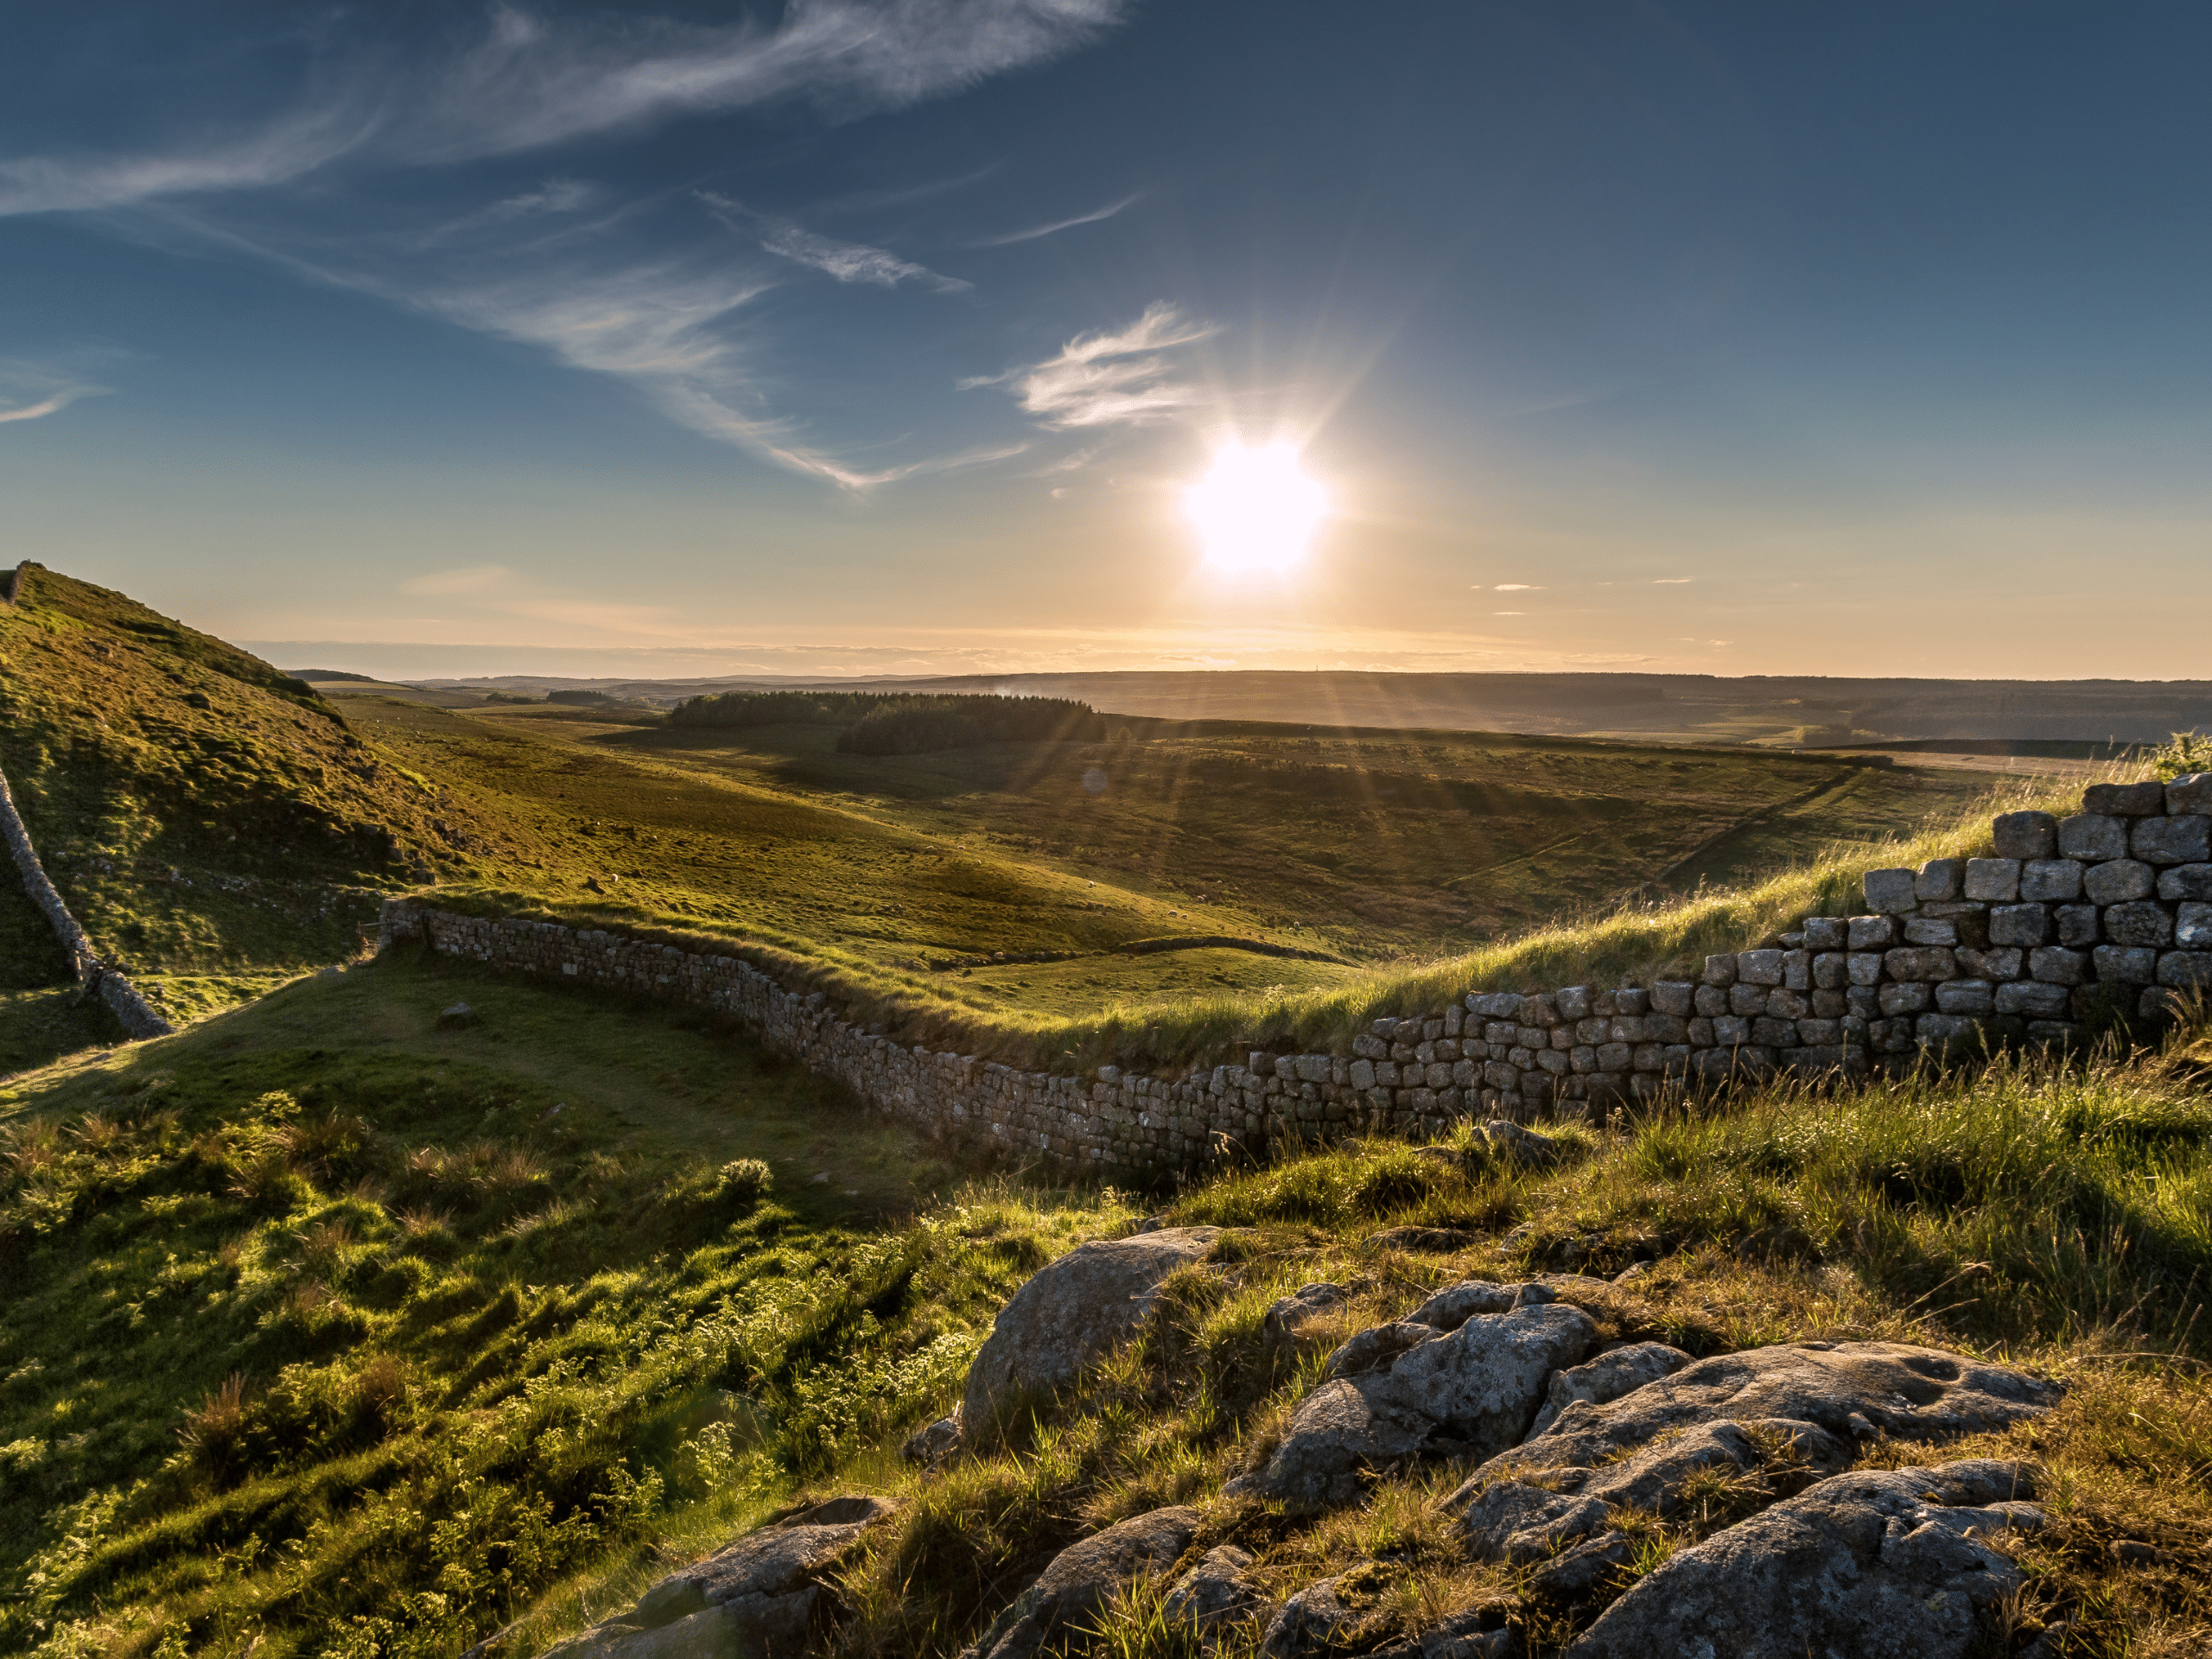 a beautiful view from the hadrian's wall. beautiful sunrise above the hadrian's wall